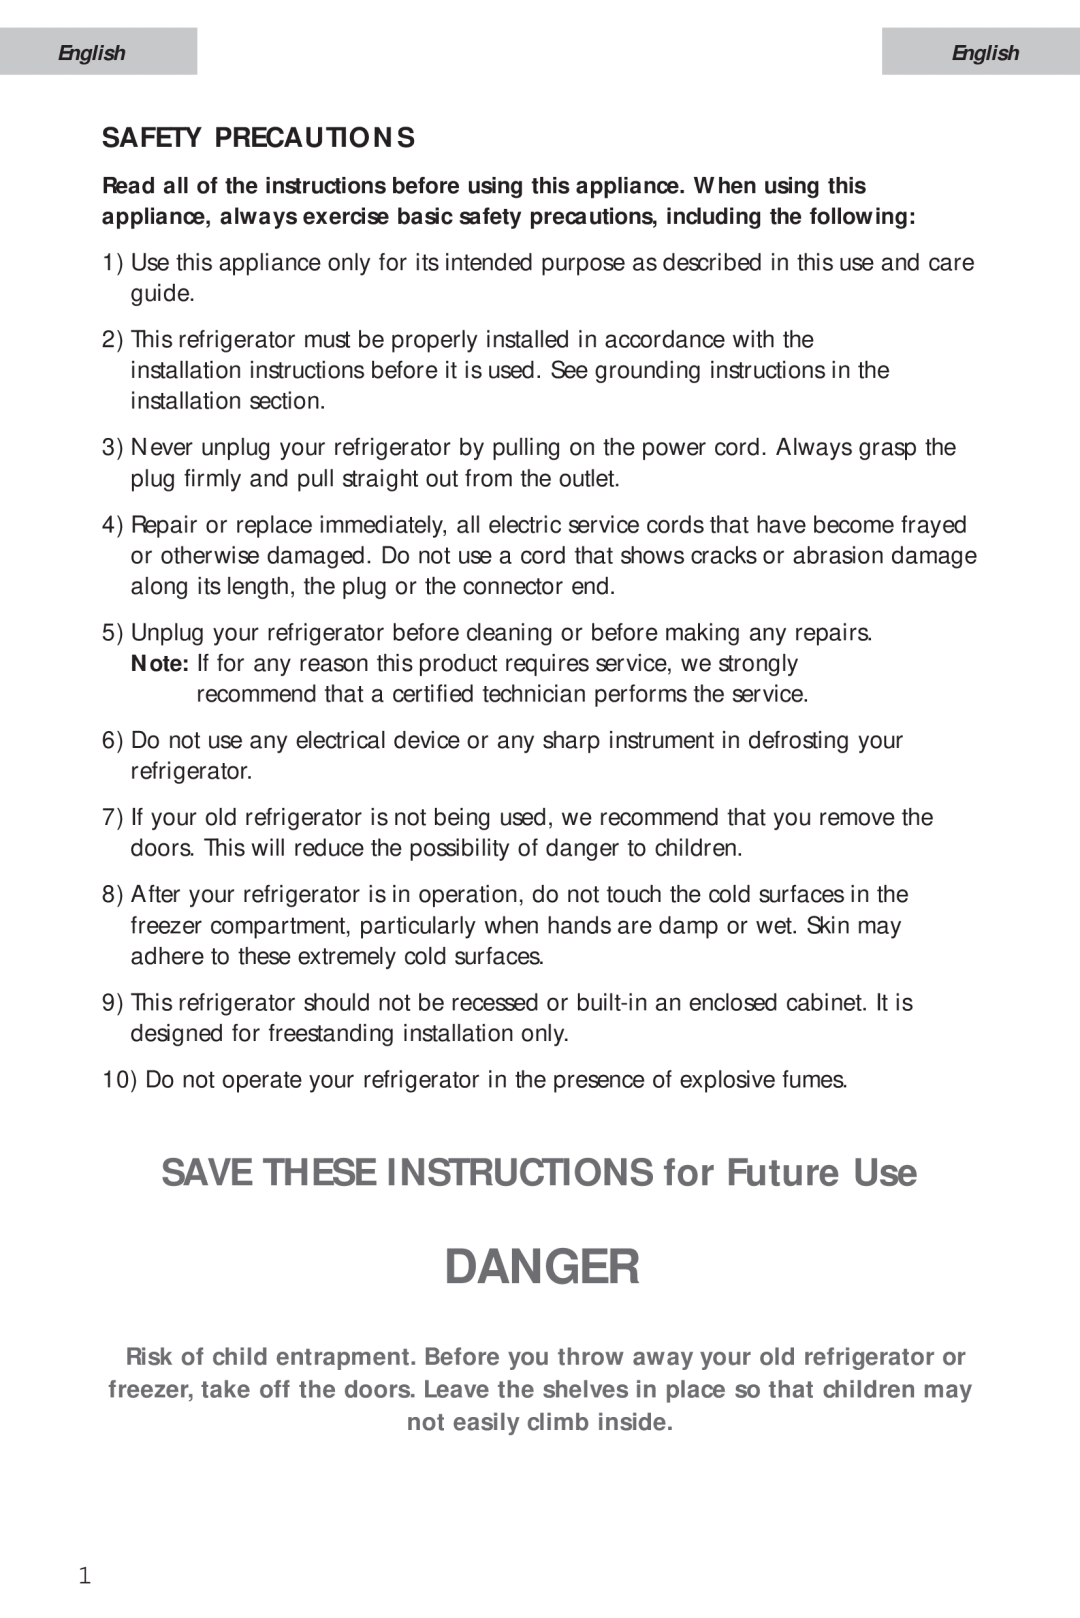 Haier ACMO3ARW manual Danger, English, Safety Precautions, SAVE THESE INSTRUCTIONS for Future Use 